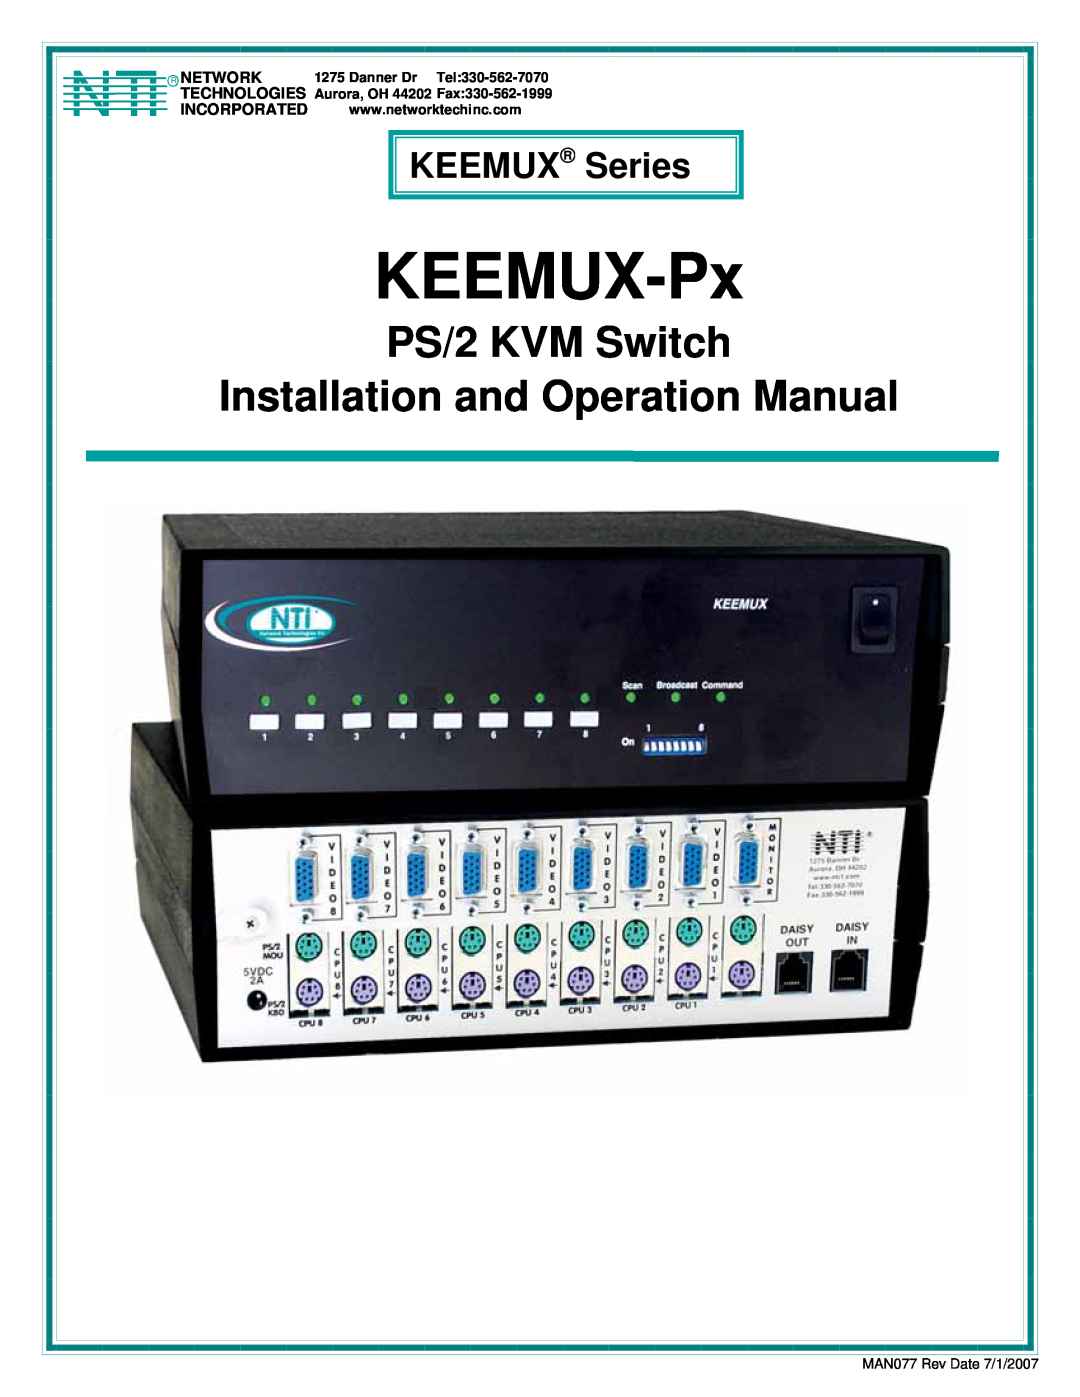 Network Technologies KEEMUX-Px operation manual KEEMUX Series, R Network, Nti Incorporated, PS/2 KVM Switch 